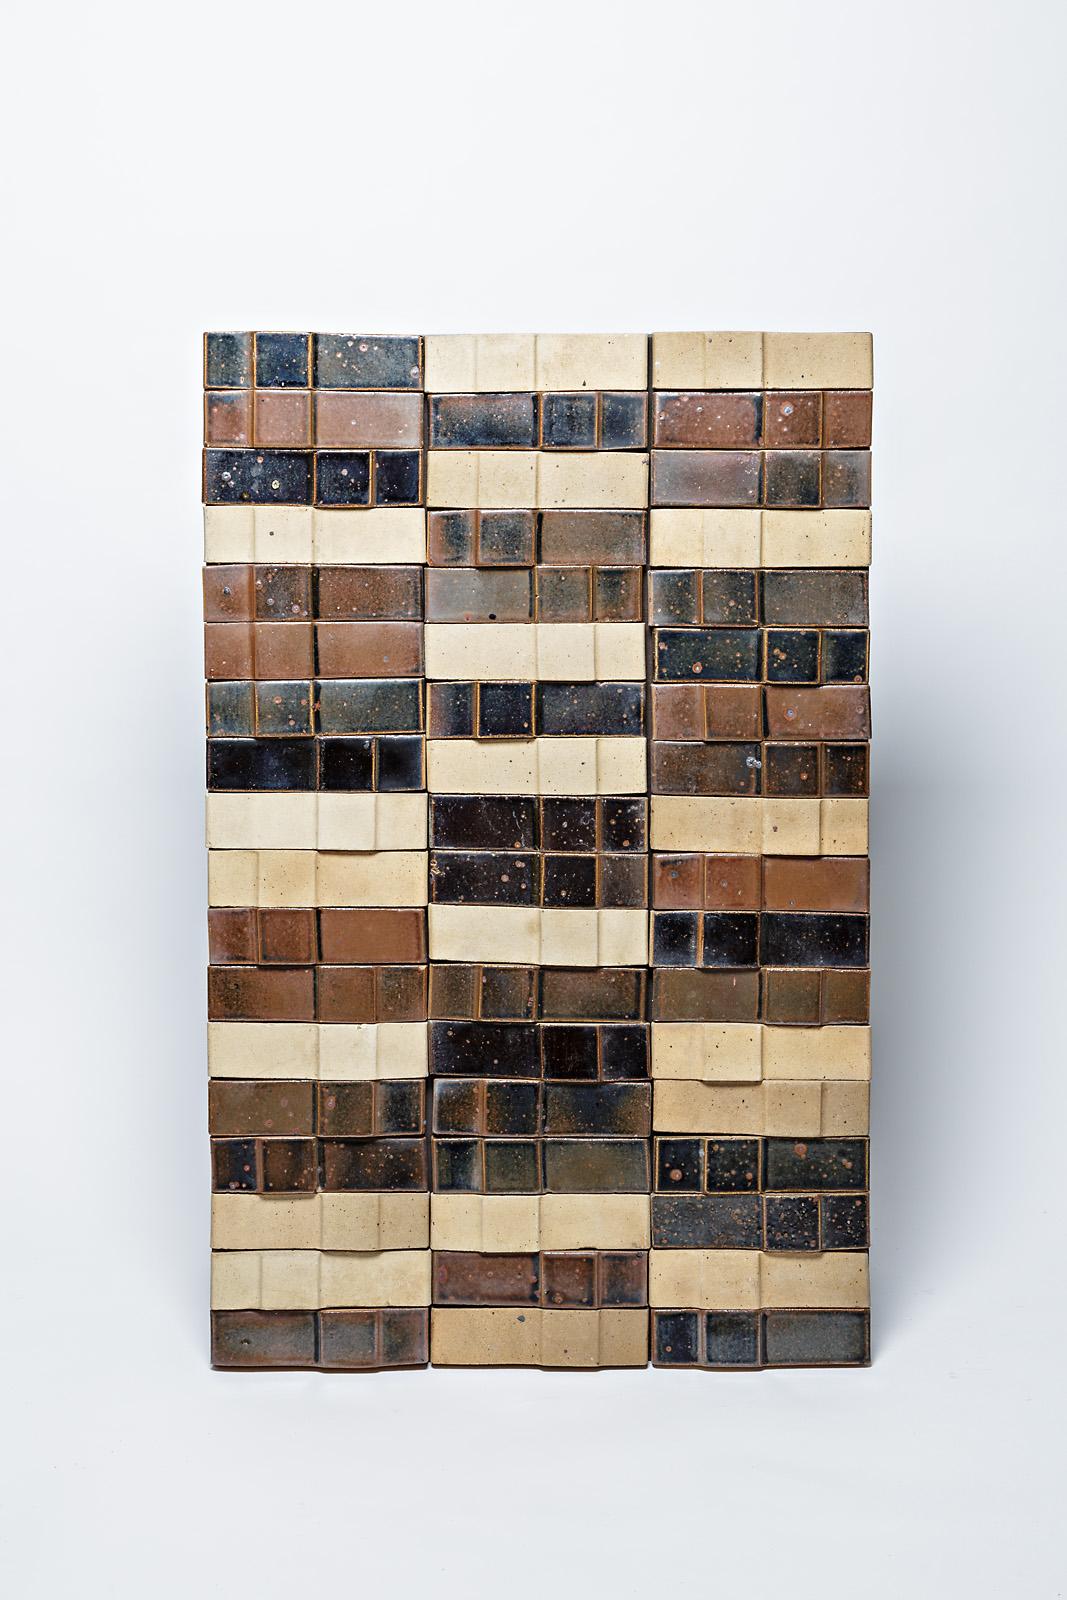 A ceramic wall panel by Pierre Digan, to La Borne, circa 1970-1975.
The base is in wood.
Very good original conditions.
A set of 9 similar panels is available.